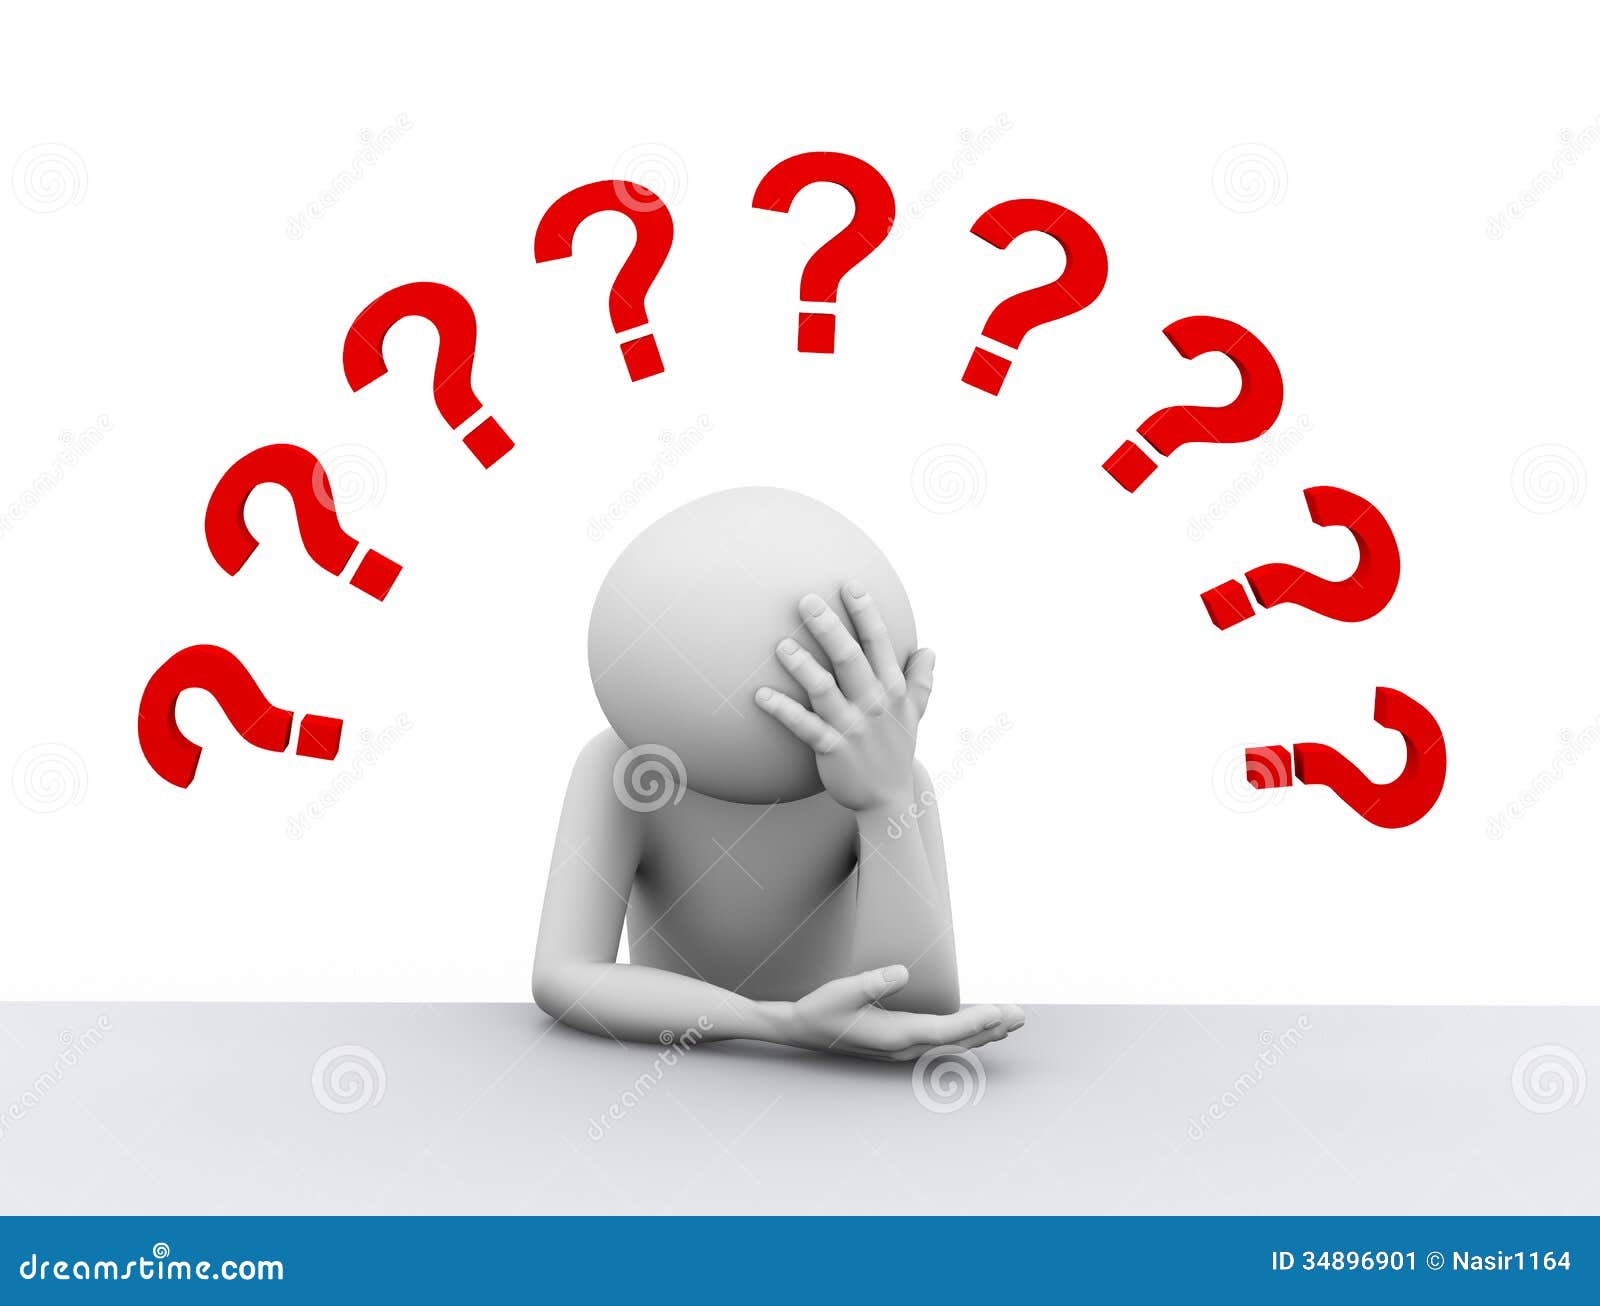 clipart questioning person - photo #27